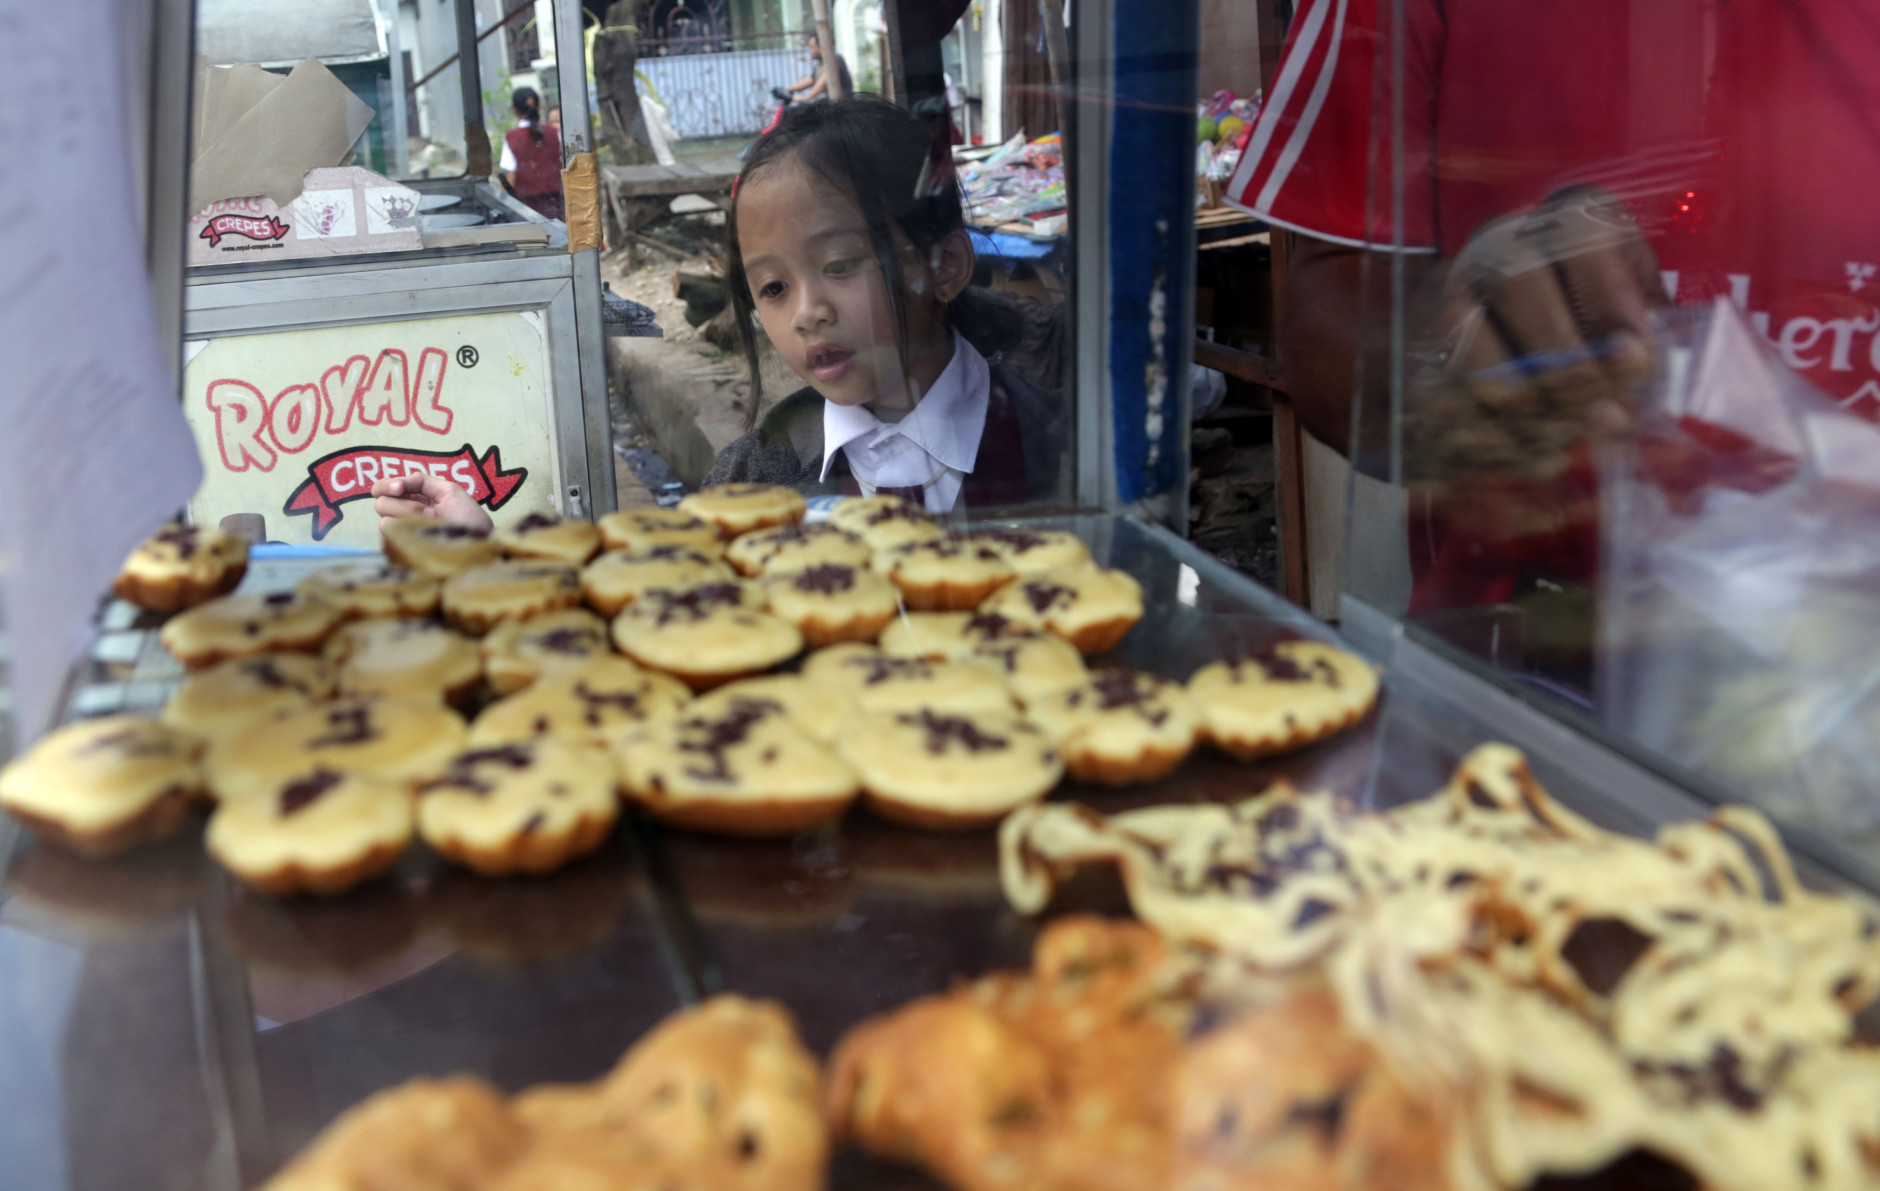 A public elementary school girl buys a pancake for her lunch on the street in Jakarta, Indonesia, Tuesday, May 6, 2014. In Indonesia, not every student can bring a lunch box to school. Public school students buy their lunch at school cafeterias or food stalls on the nearby streets. The price for one pancake is about one U.S. cent. (AP Photo/Achmad Ibrahim)